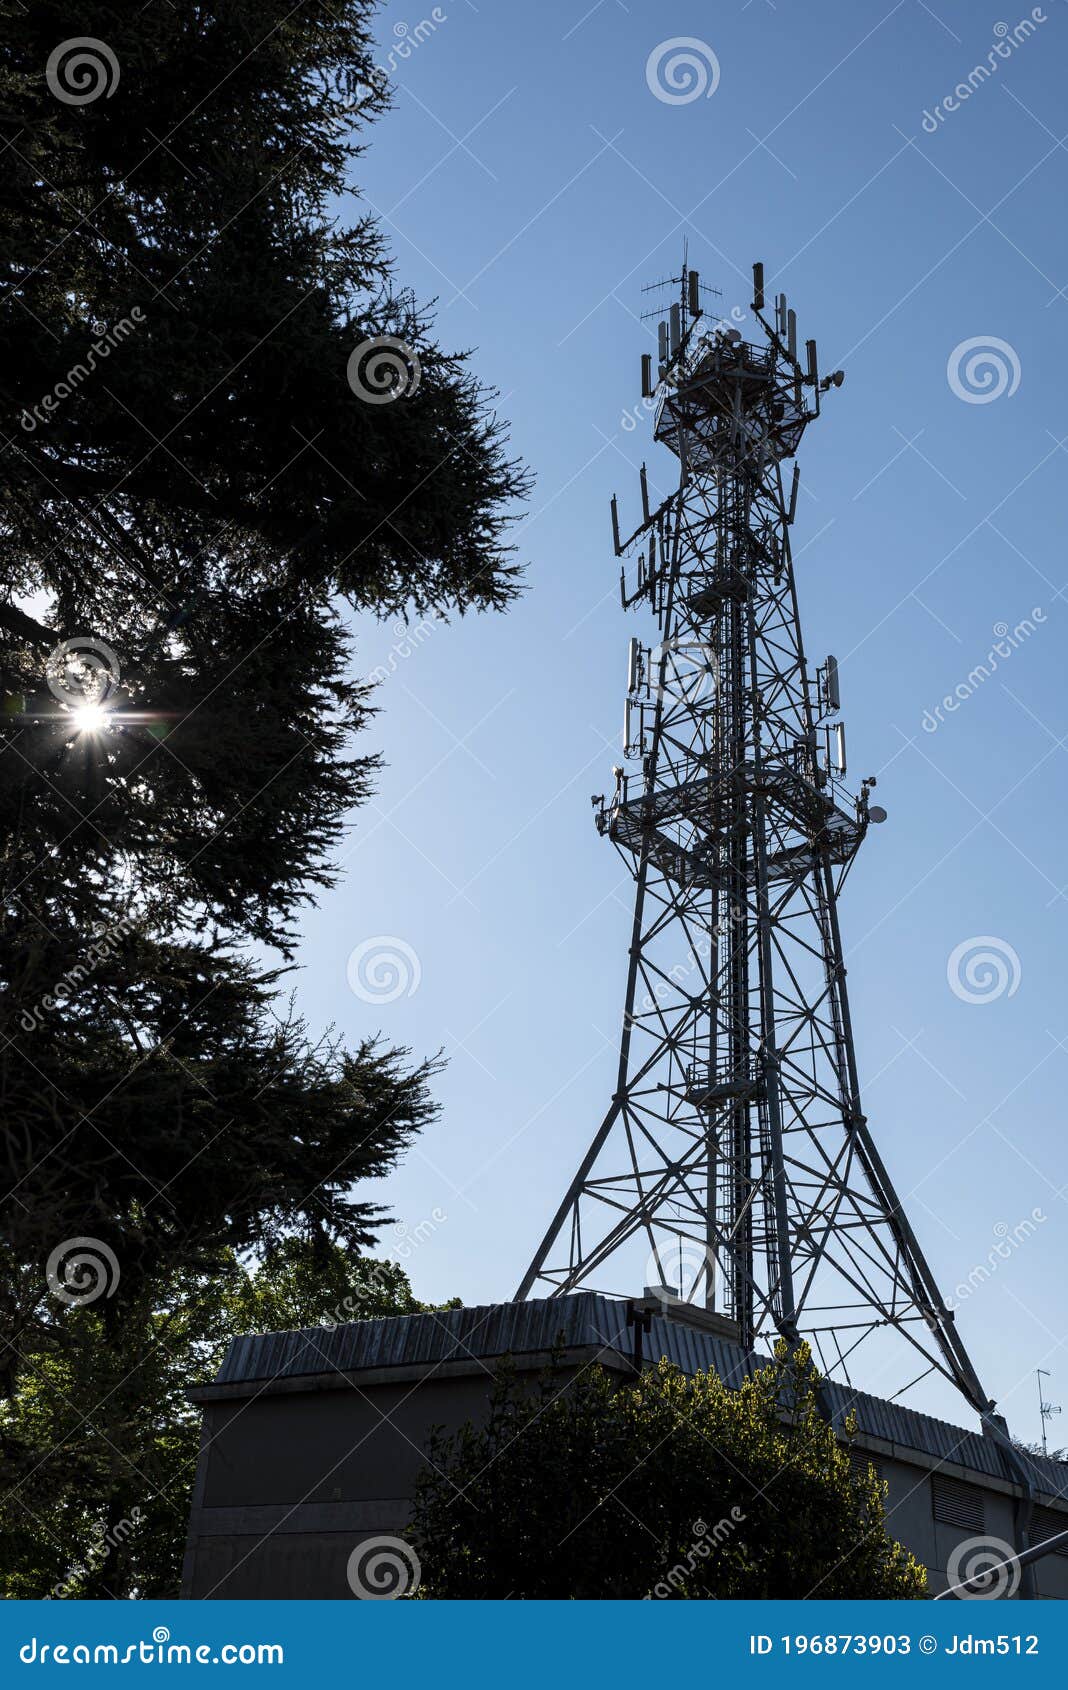 Silhouette Of Antenna Used For Mobile Phones Telecommunications And Trees Stock Image Image Of Broadcast Phones 196873903